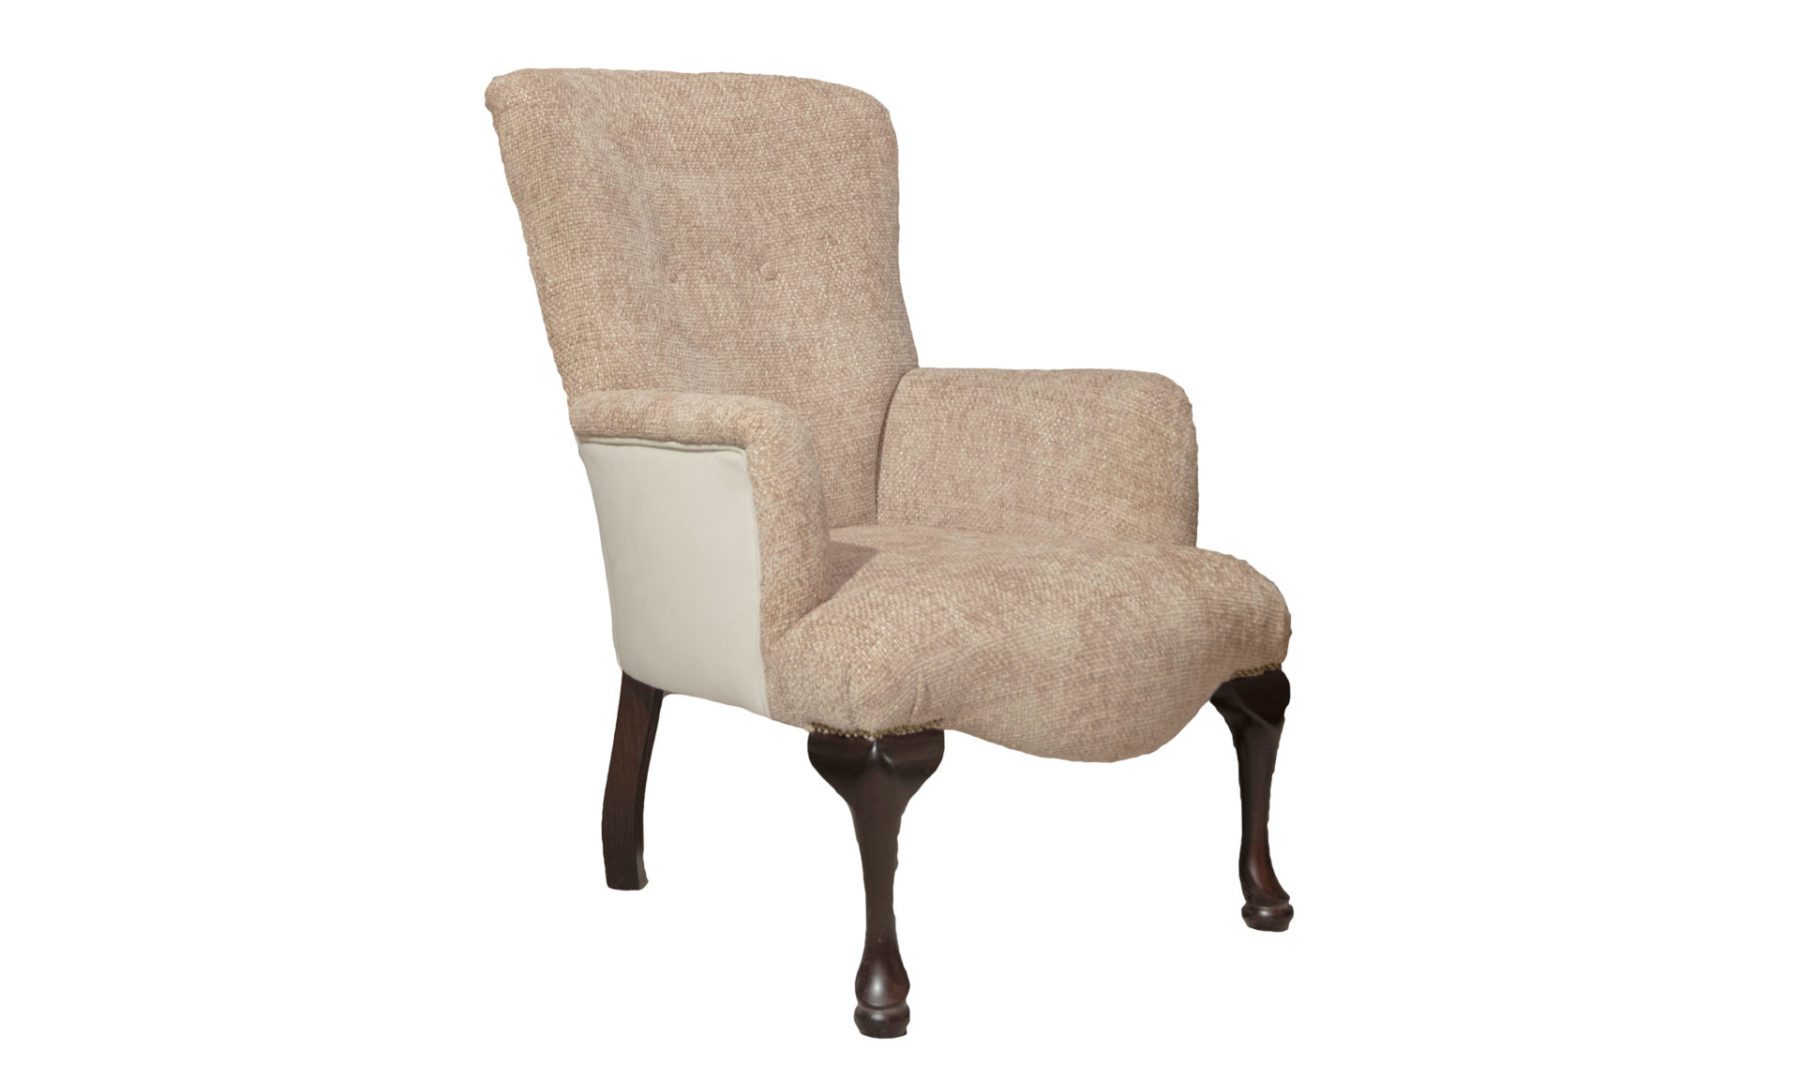 Aisling Chair in Schino Blush, Gold Collection Fabric